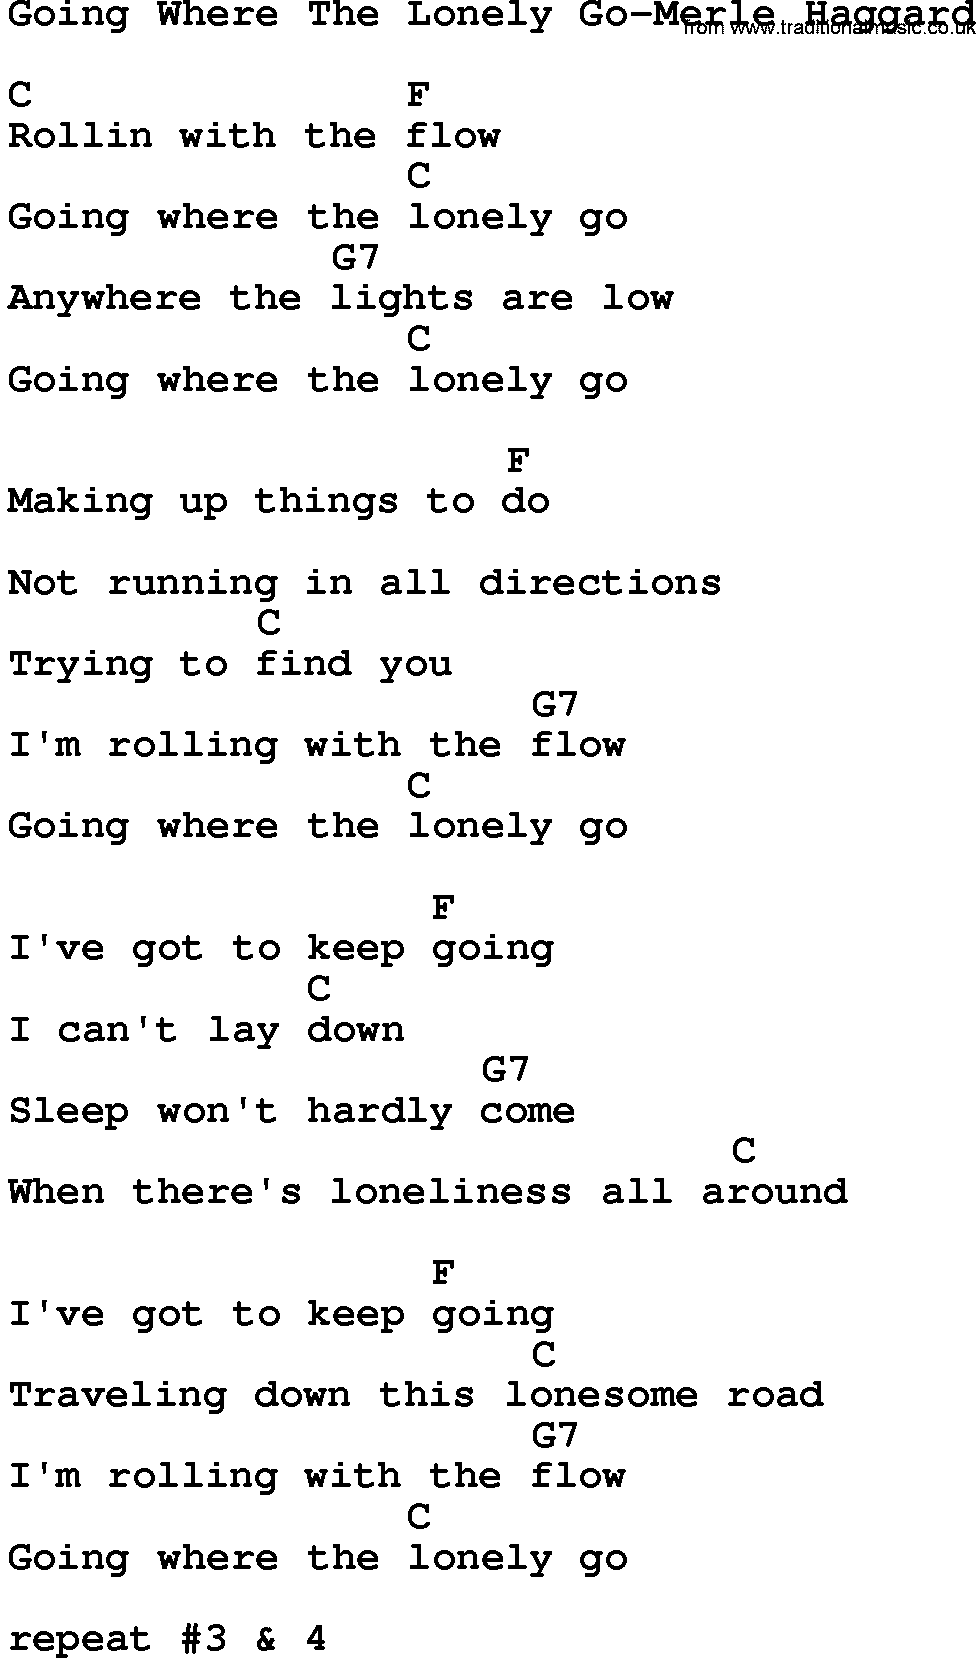 Country music song: Going Where The Lonely Go-Merle Haggard lyrics and chords